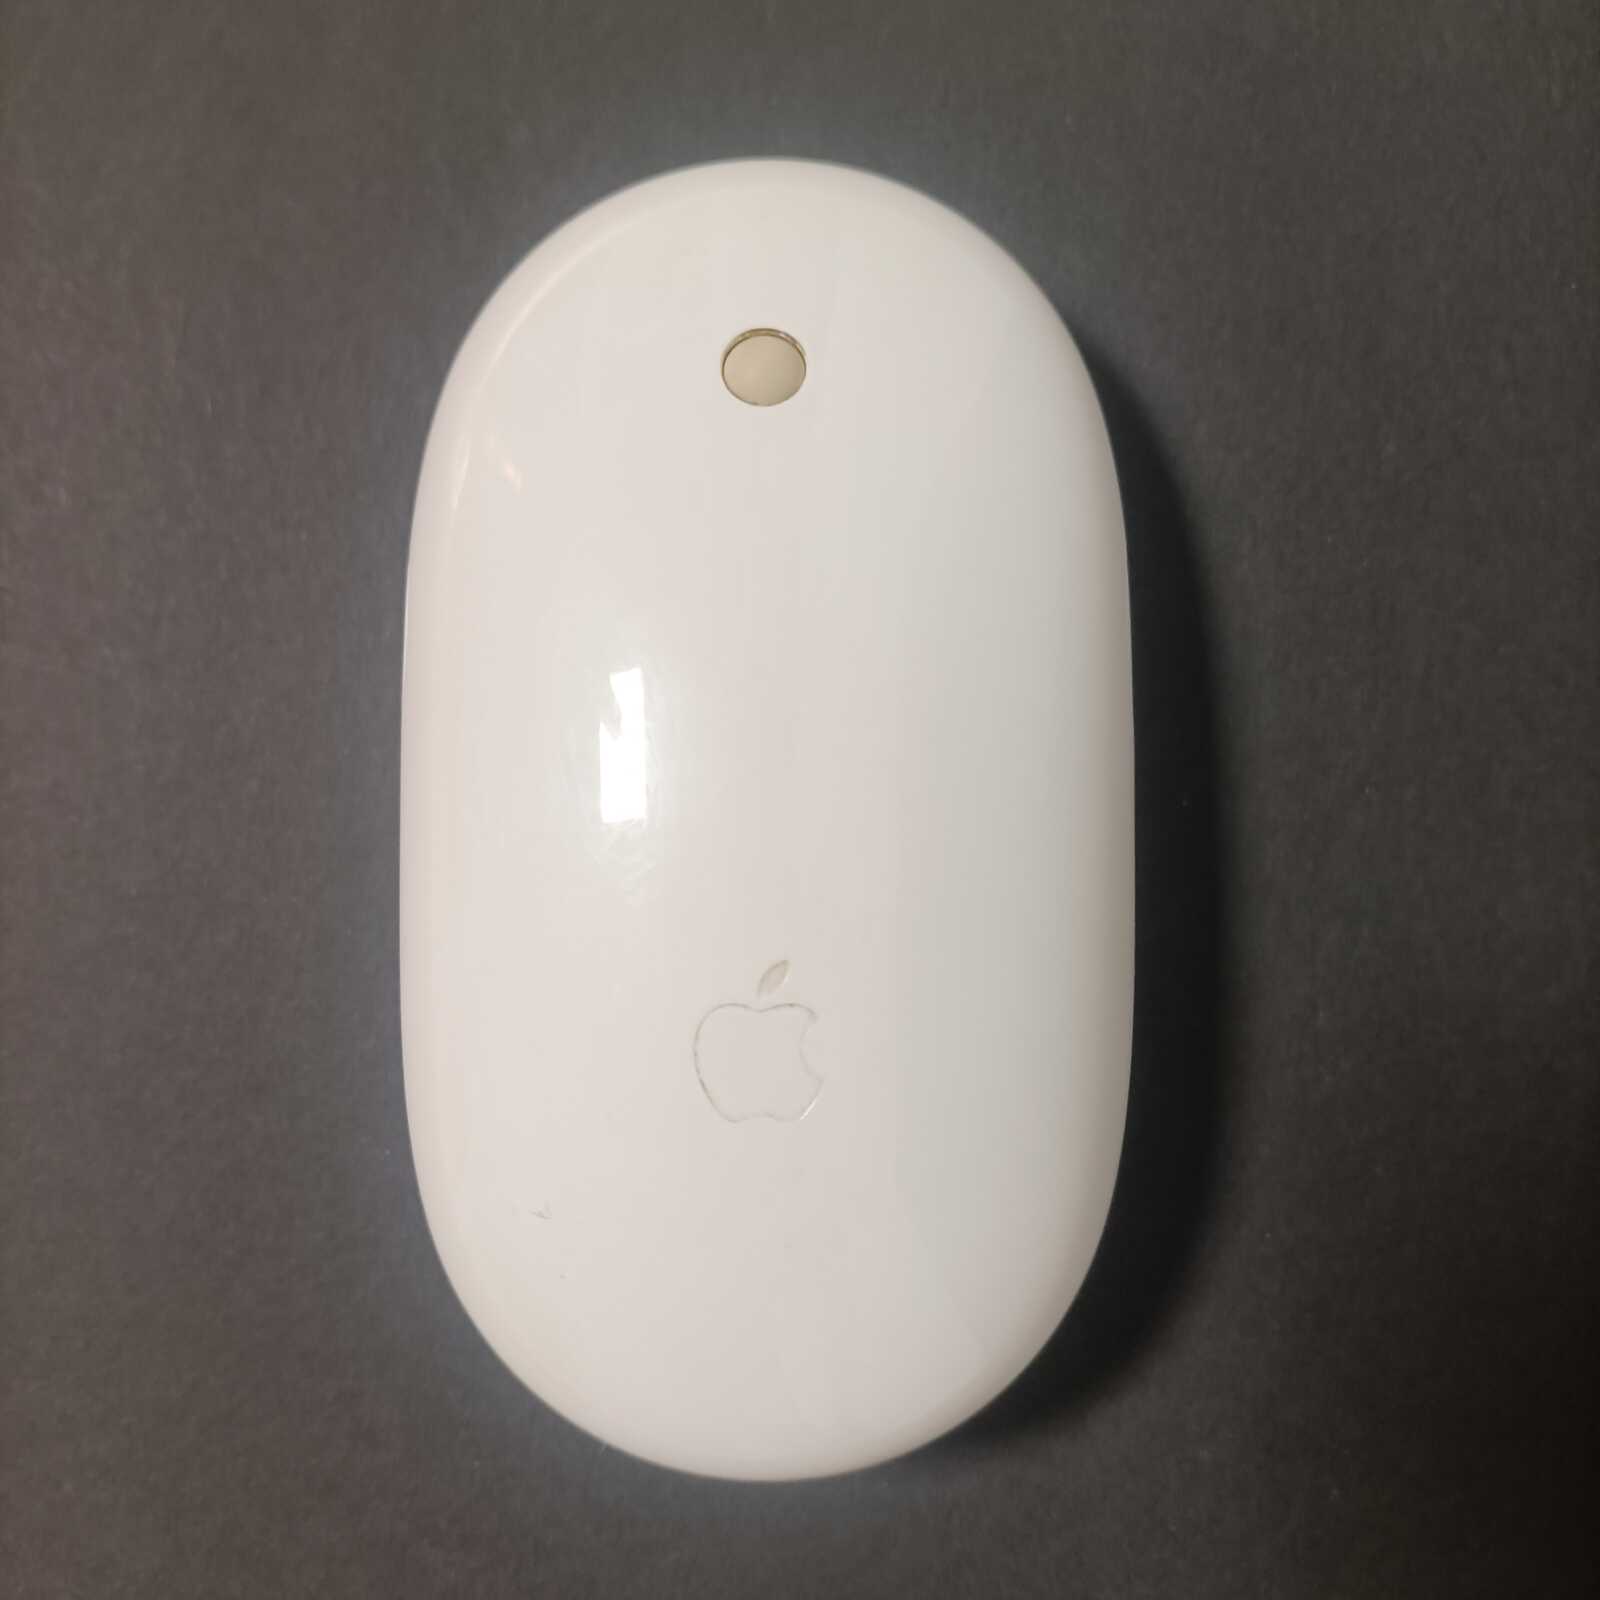 Mouse Apple 2010